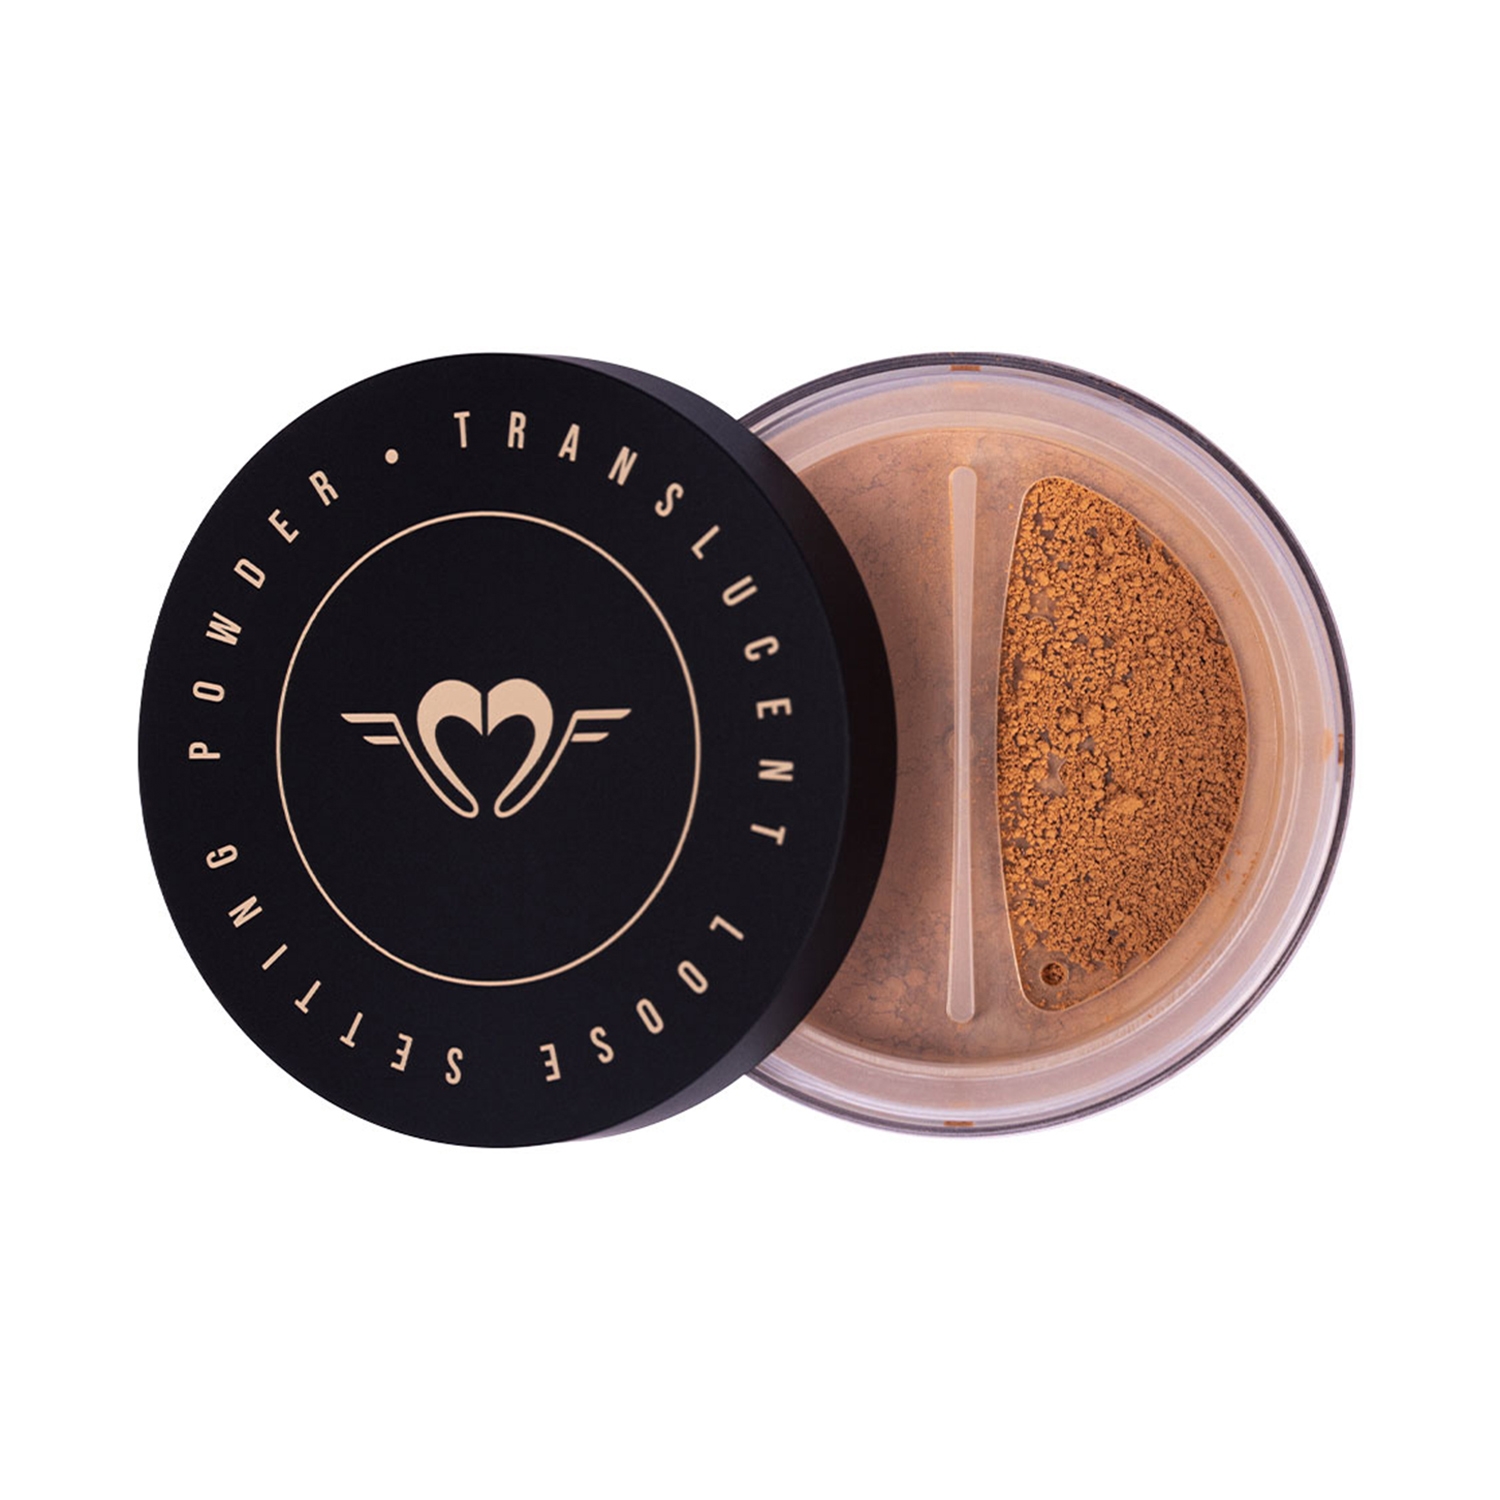 Daily Life Forever52 | Daily Life Forever52 Translucent Loose Setting Powder TLM008 - Warm Sun (7g)